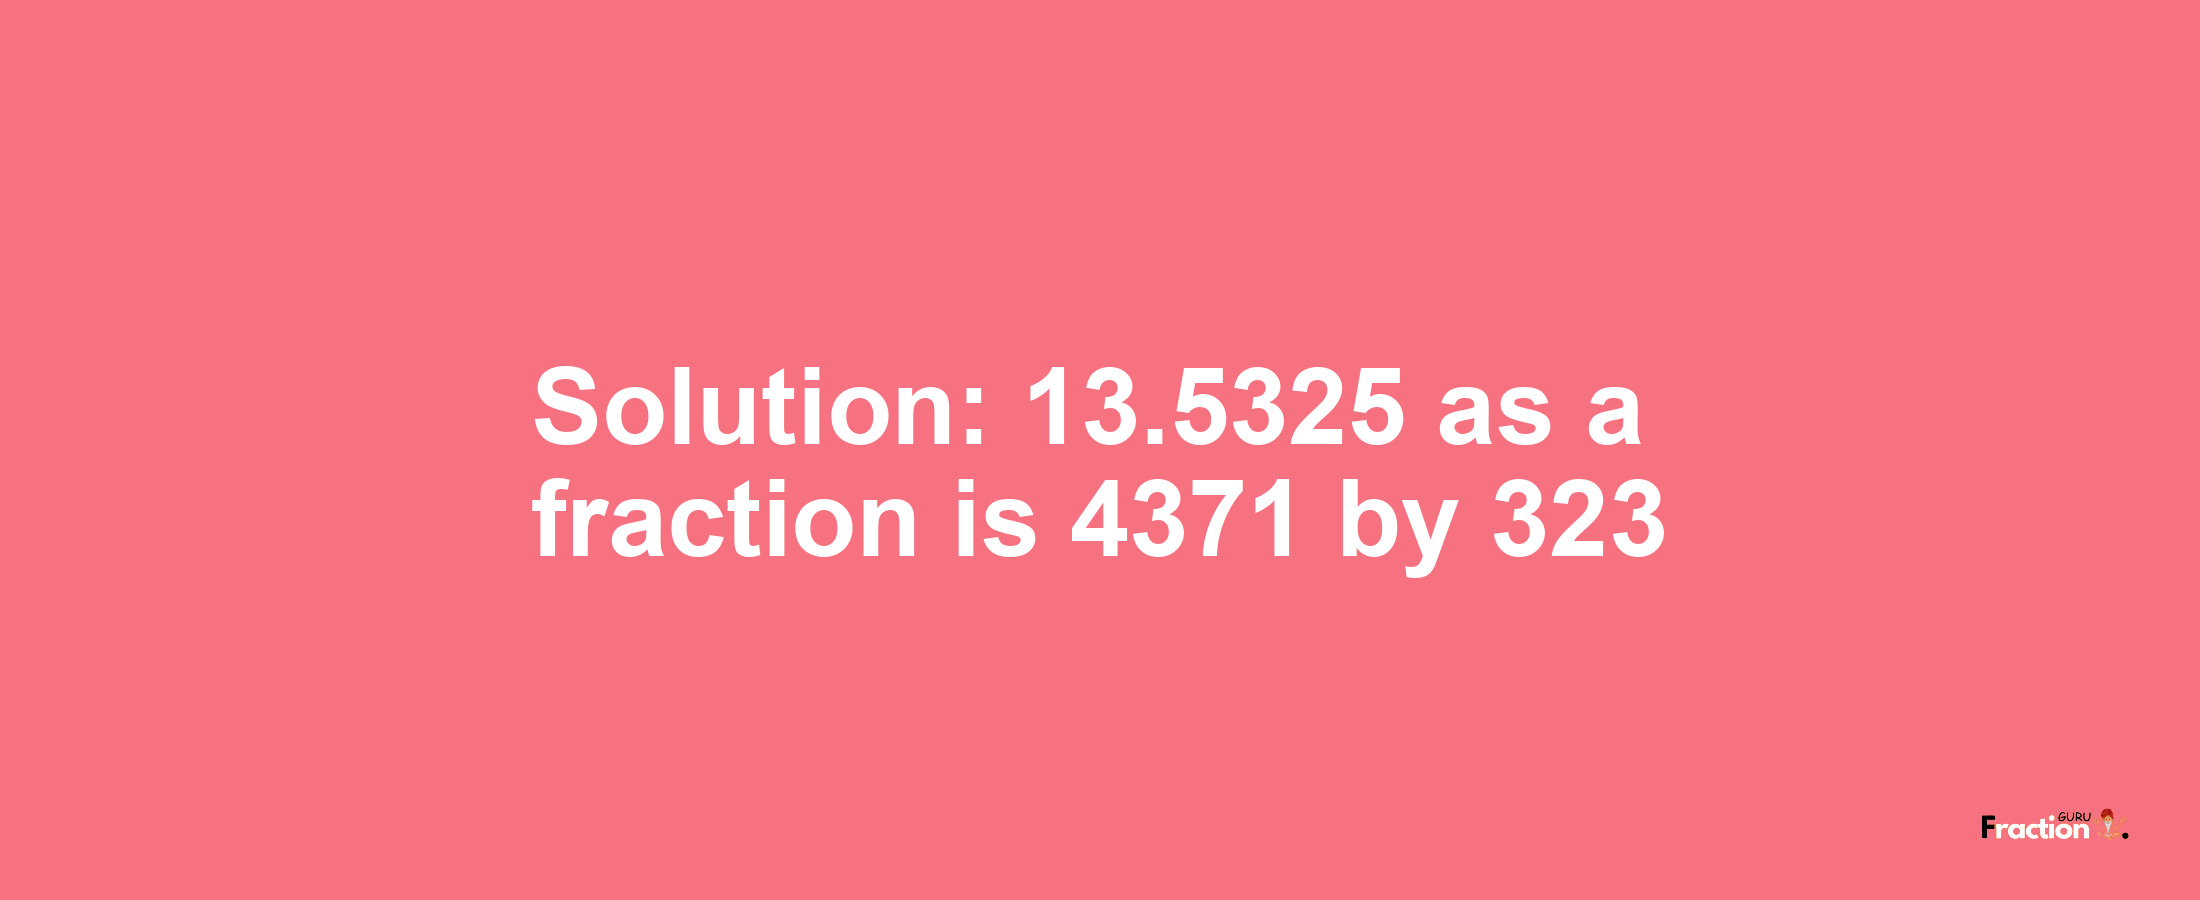 Solution:13.5325 as a fraction is 4371/323